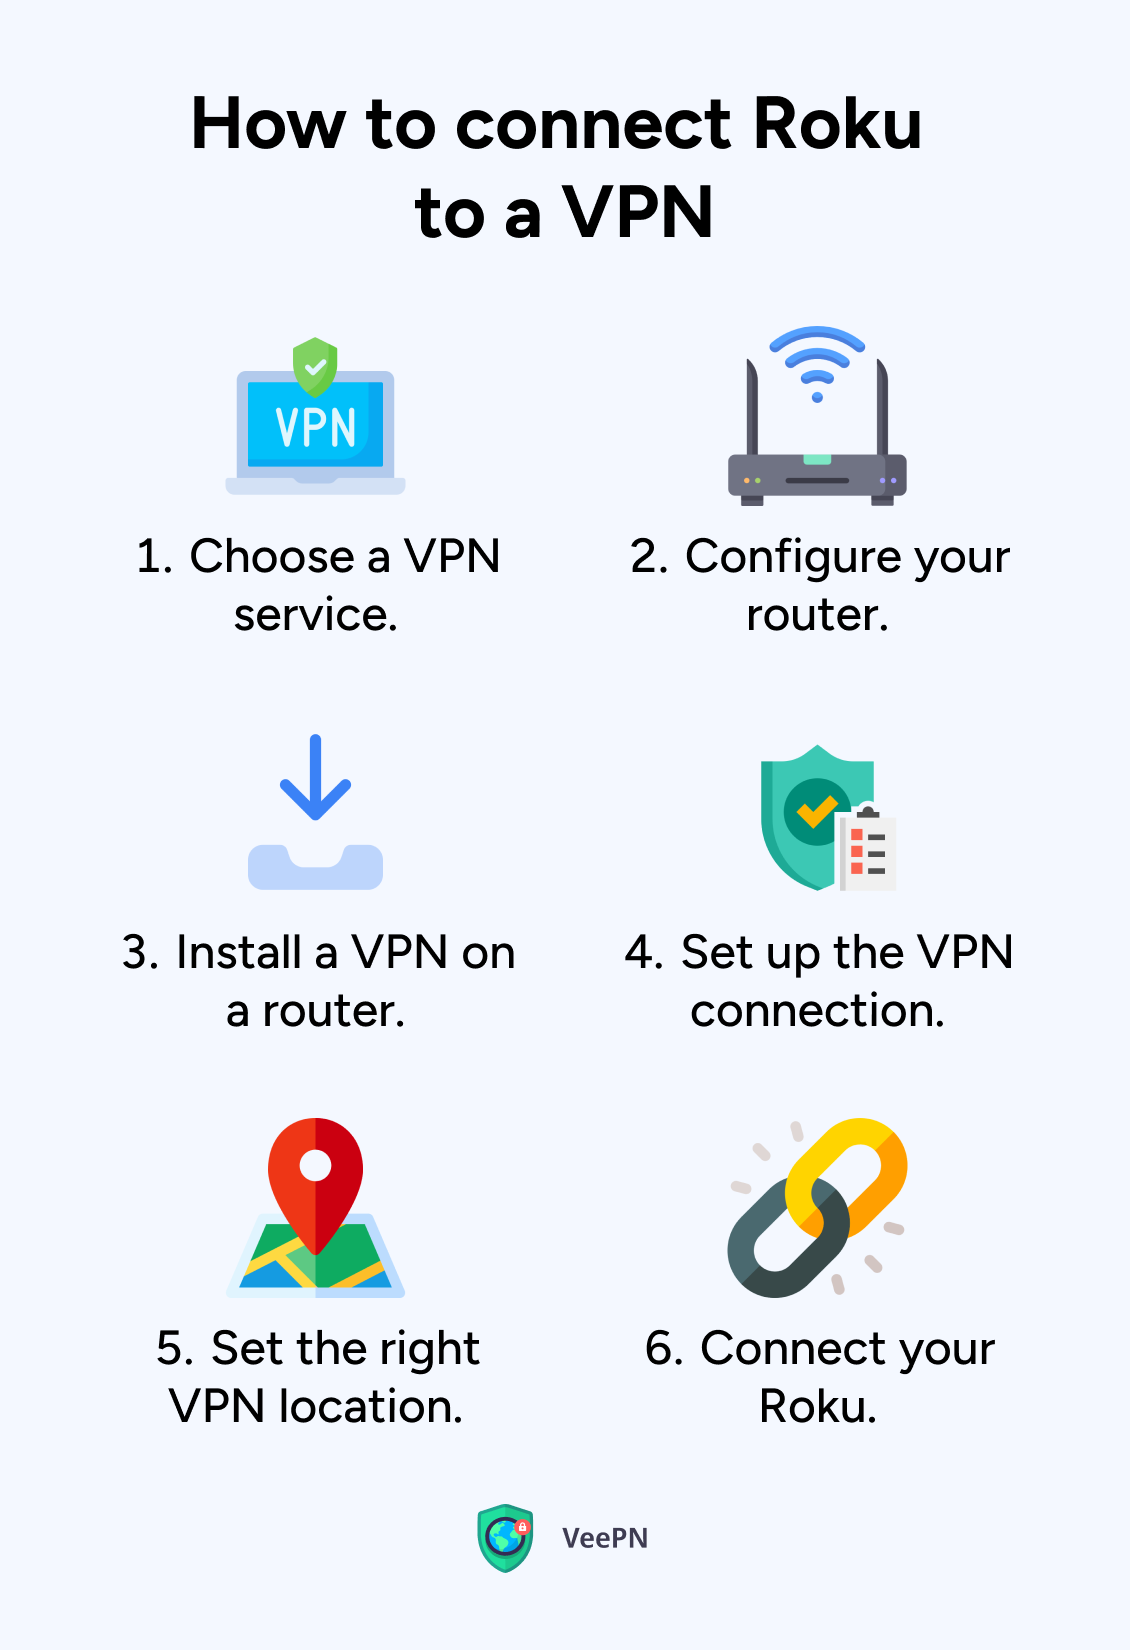 How to set up a VPN for Roku